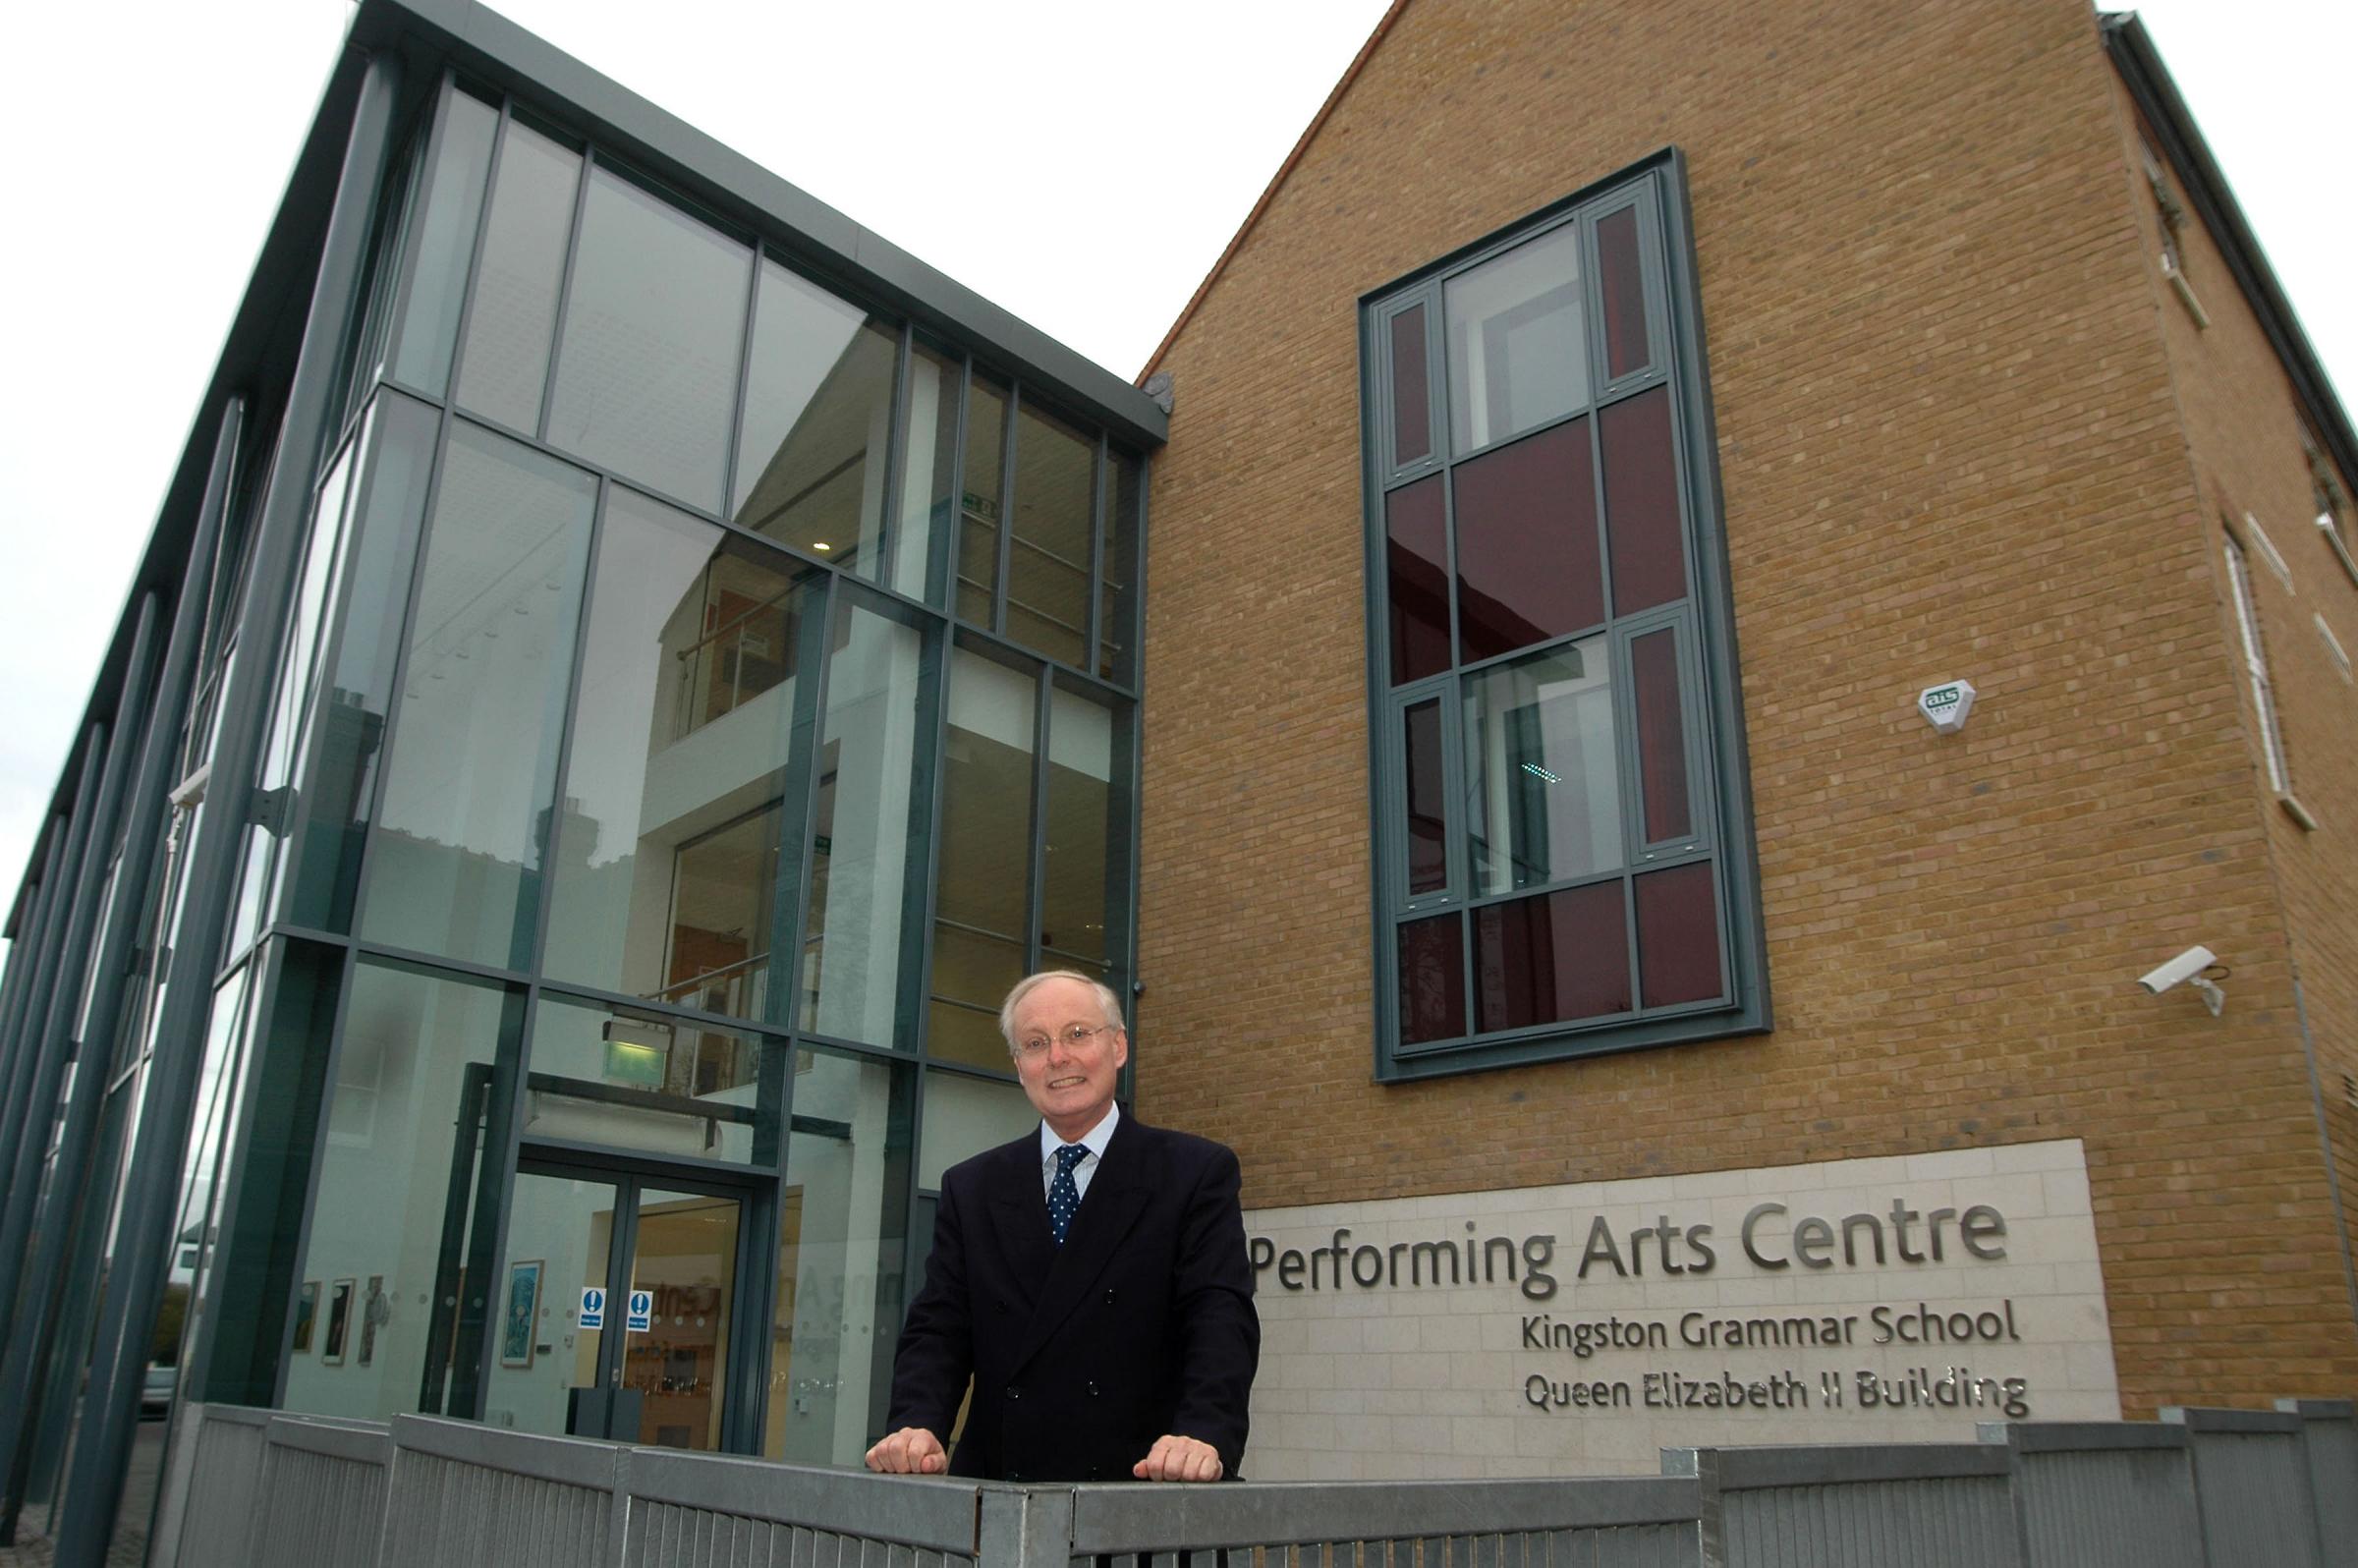 Kingston Grammar School to become streaming venue of National Theatre performances